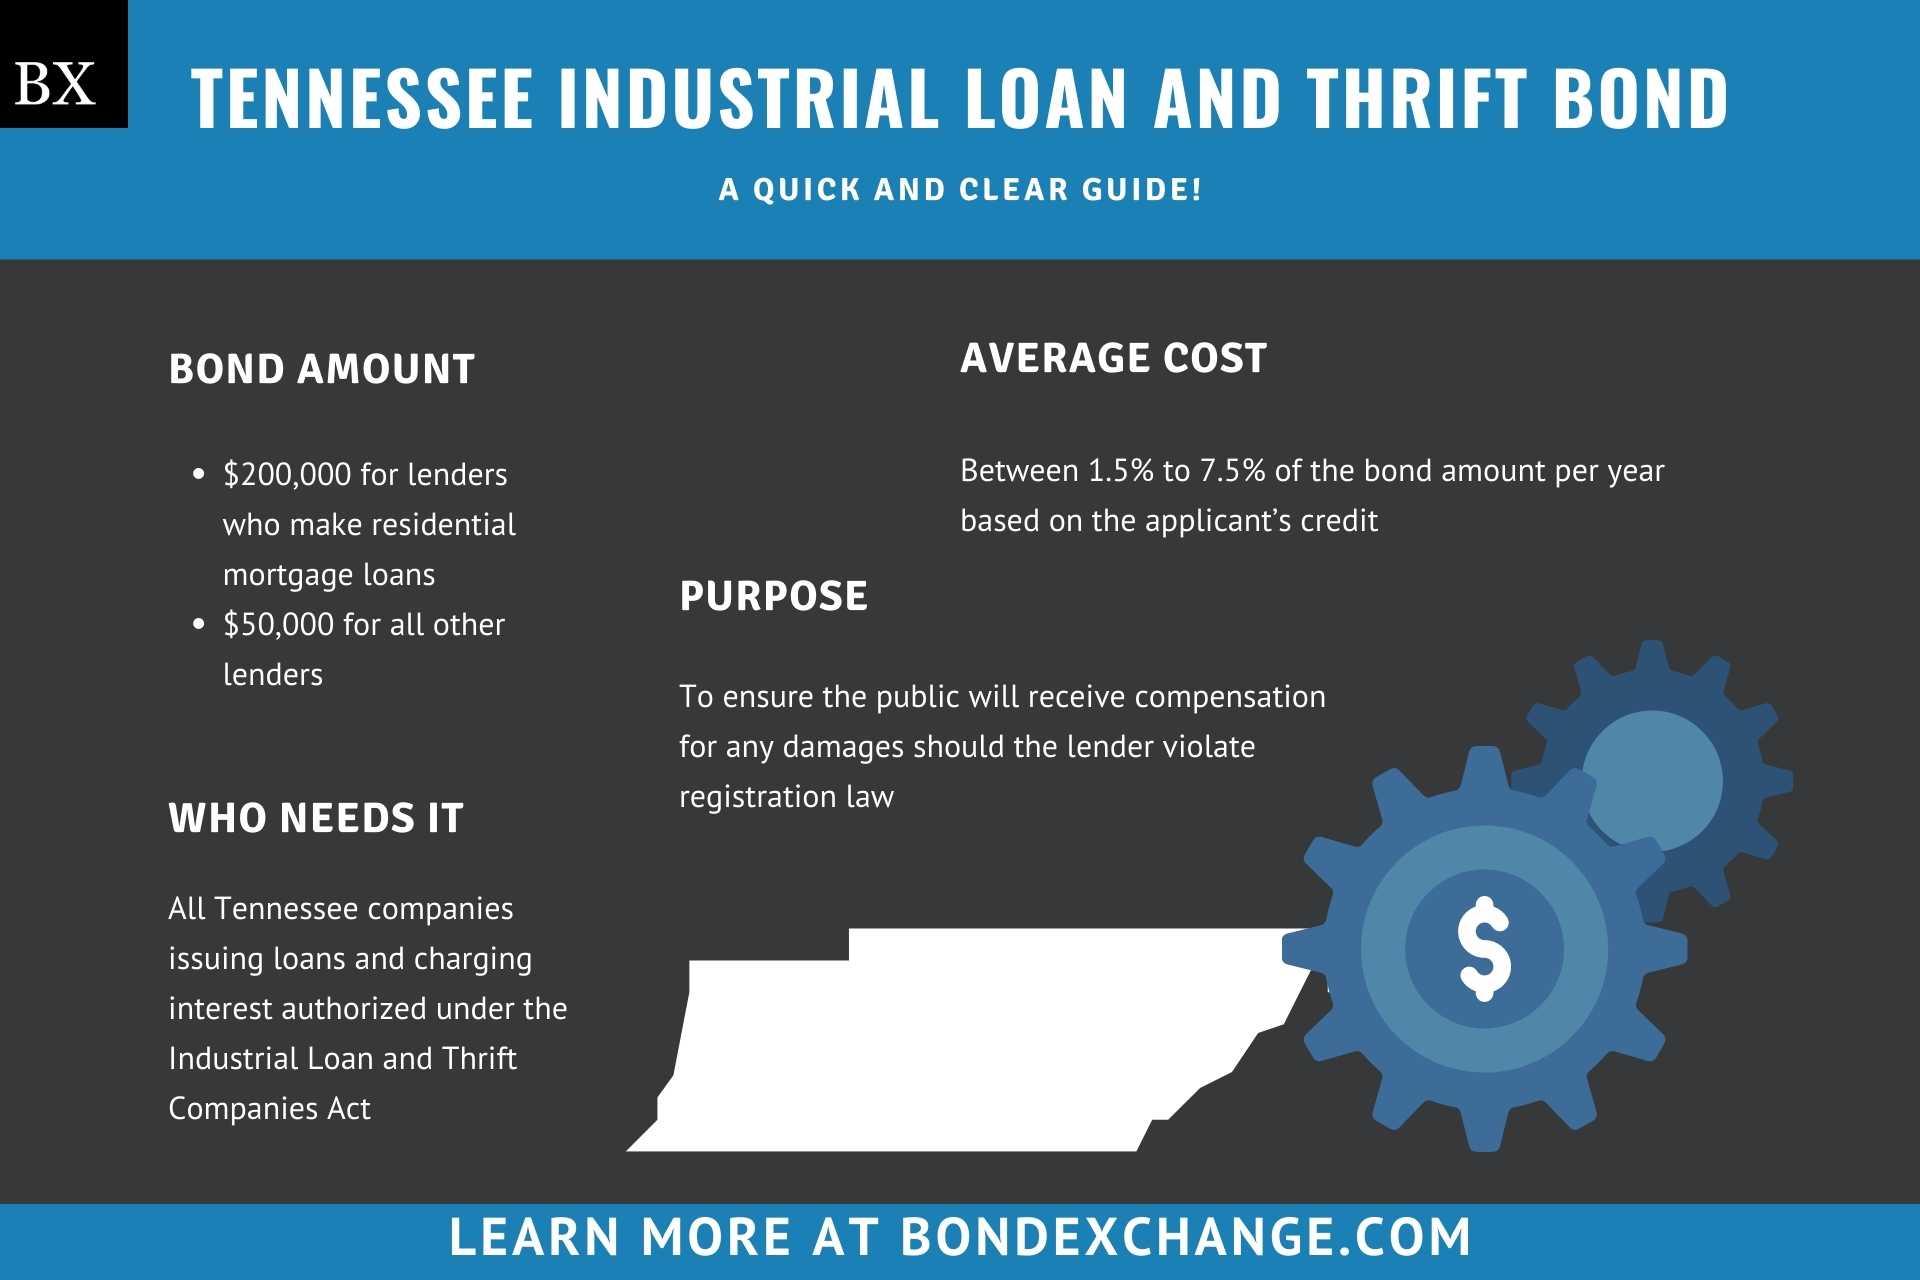 Tennessee Industrial Loan and Thrift Bond